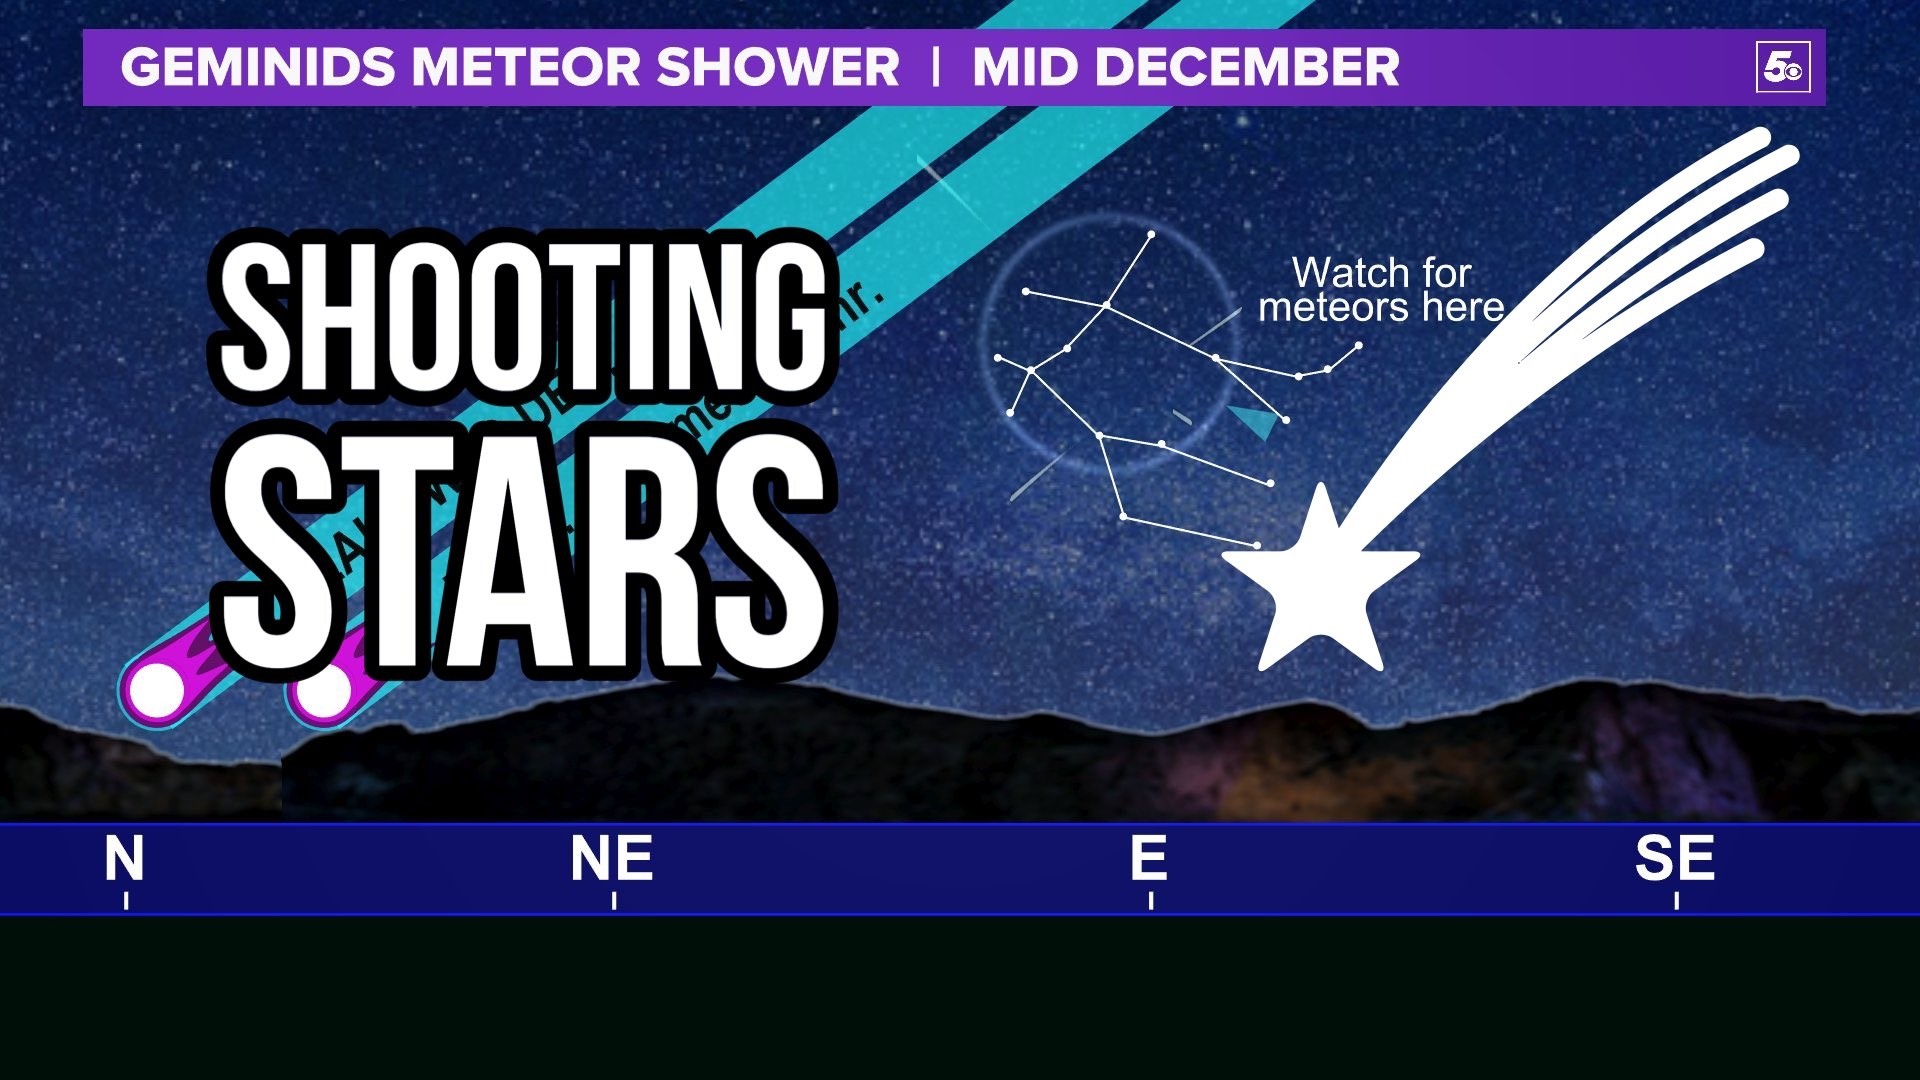 One of the best chances to see a shooting star takes place in December with the Geminids meteor shower. Where should you look?